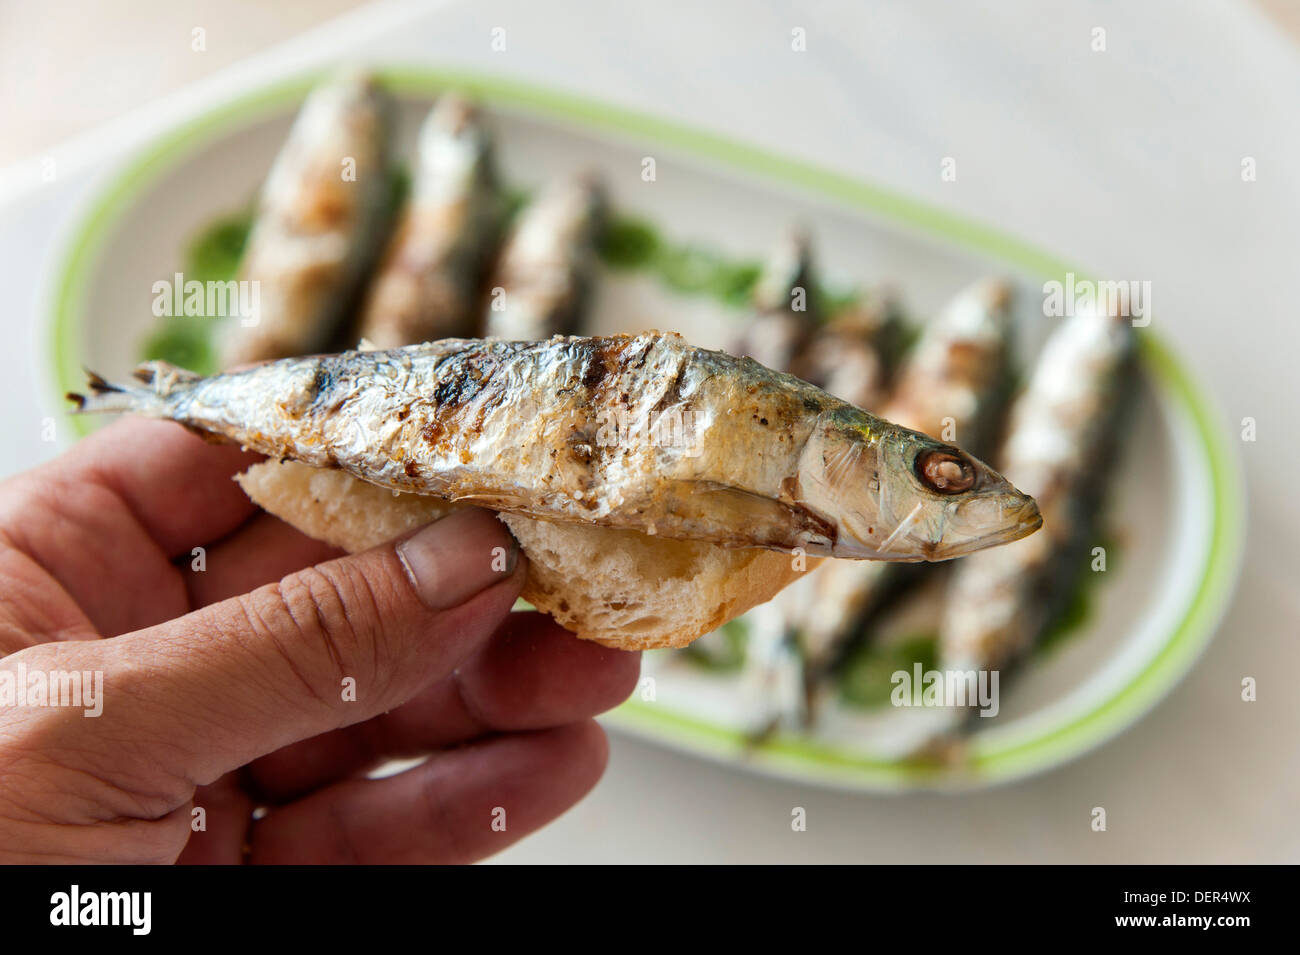 male hand holds piece of bread with freshly grilled sardine (Sardina pilchardus) . Plate with 7 sardines in background Stock Photo